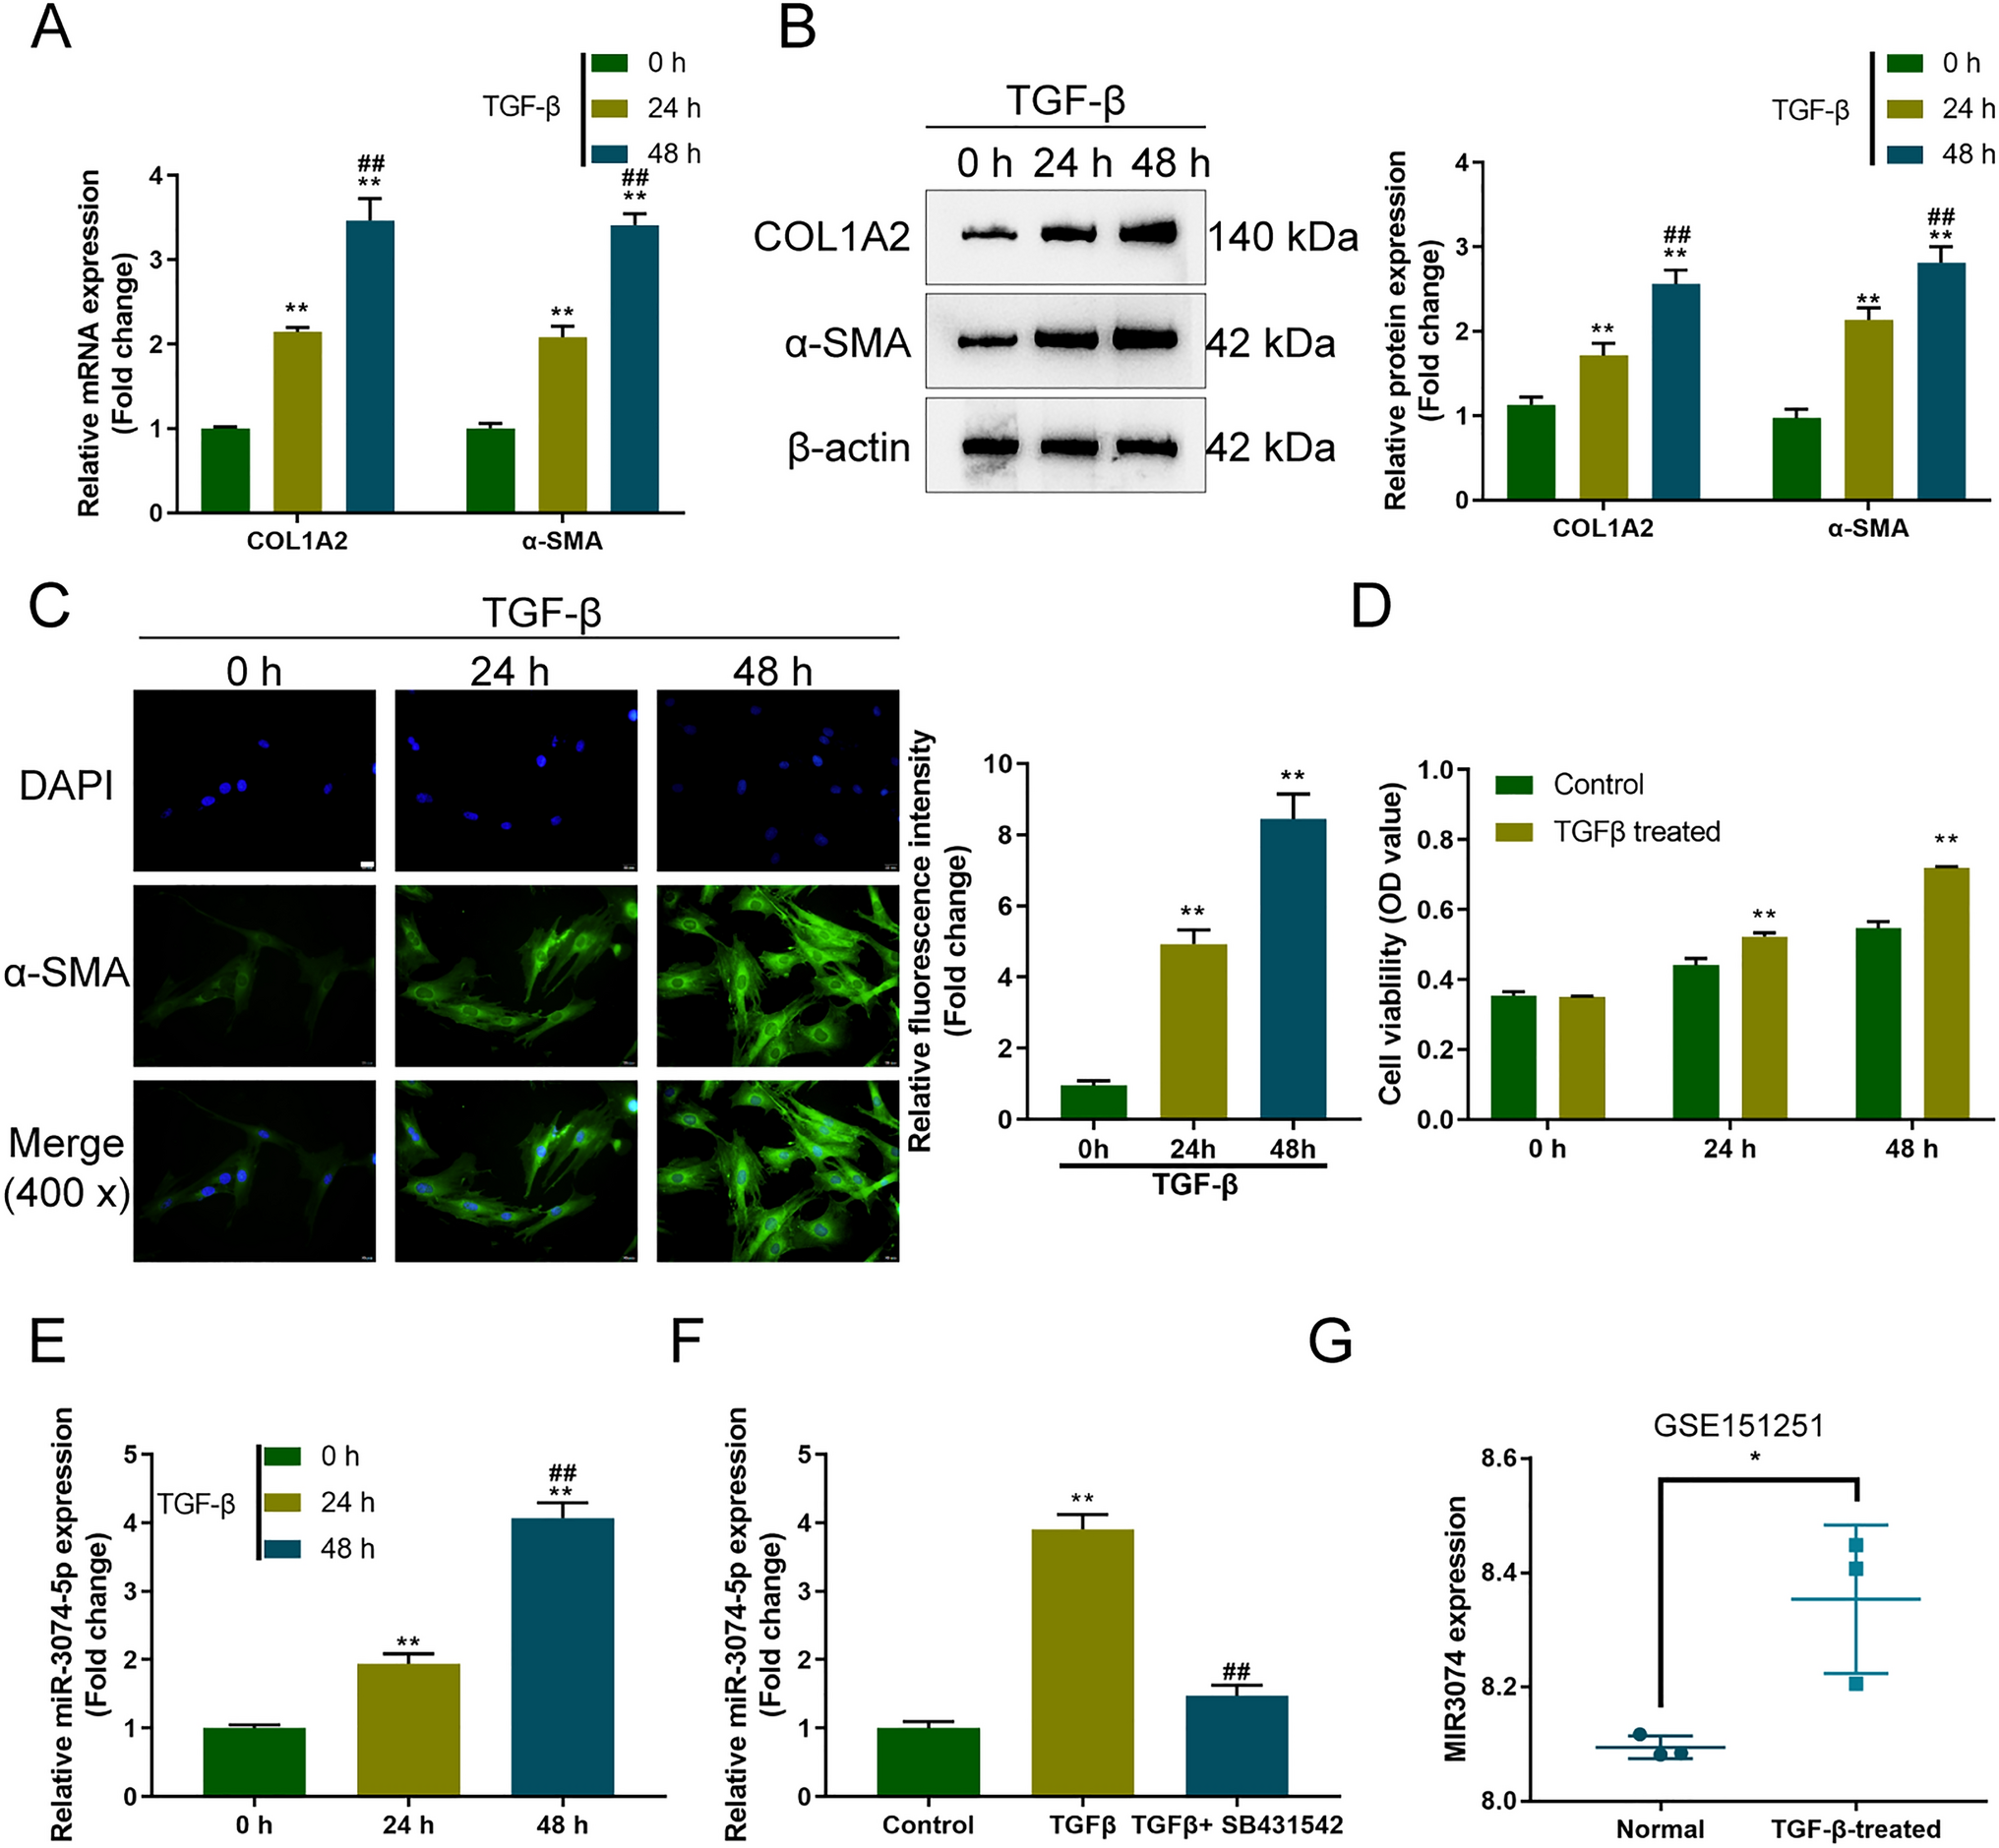 The miR-3074/BMP7 axis regulates TGF-β-caused activation of hepatic stellate cells in vitro and CCl4-caused murine liver fibrosis in vivo